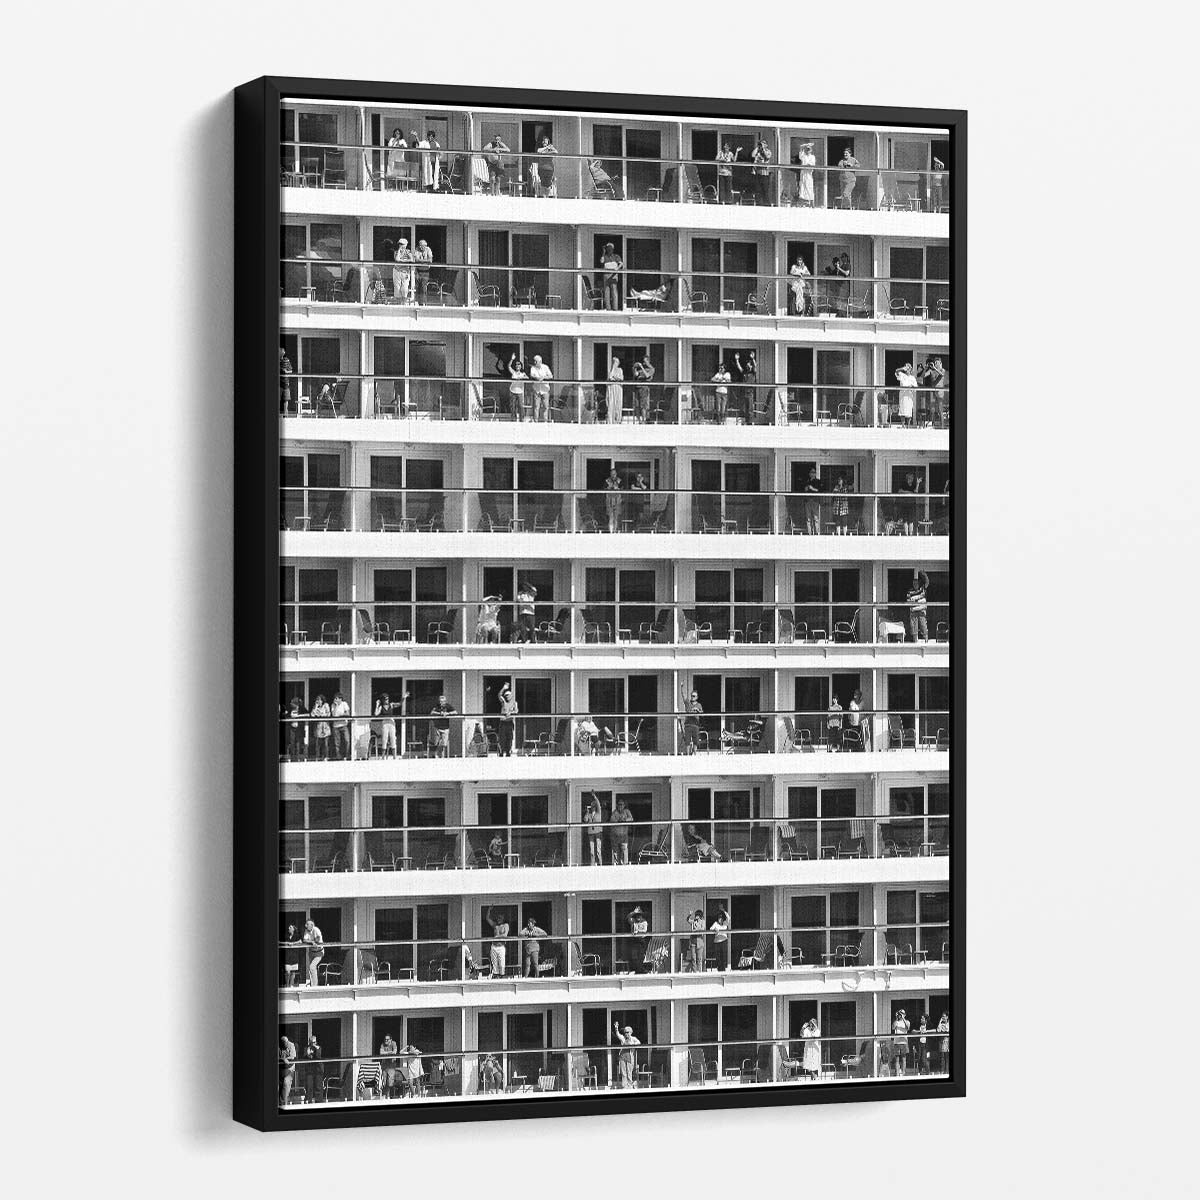 Franz Baumann's Black and White Architectural Photography, Mass Tourism by Luxuriance Designs, made in USA